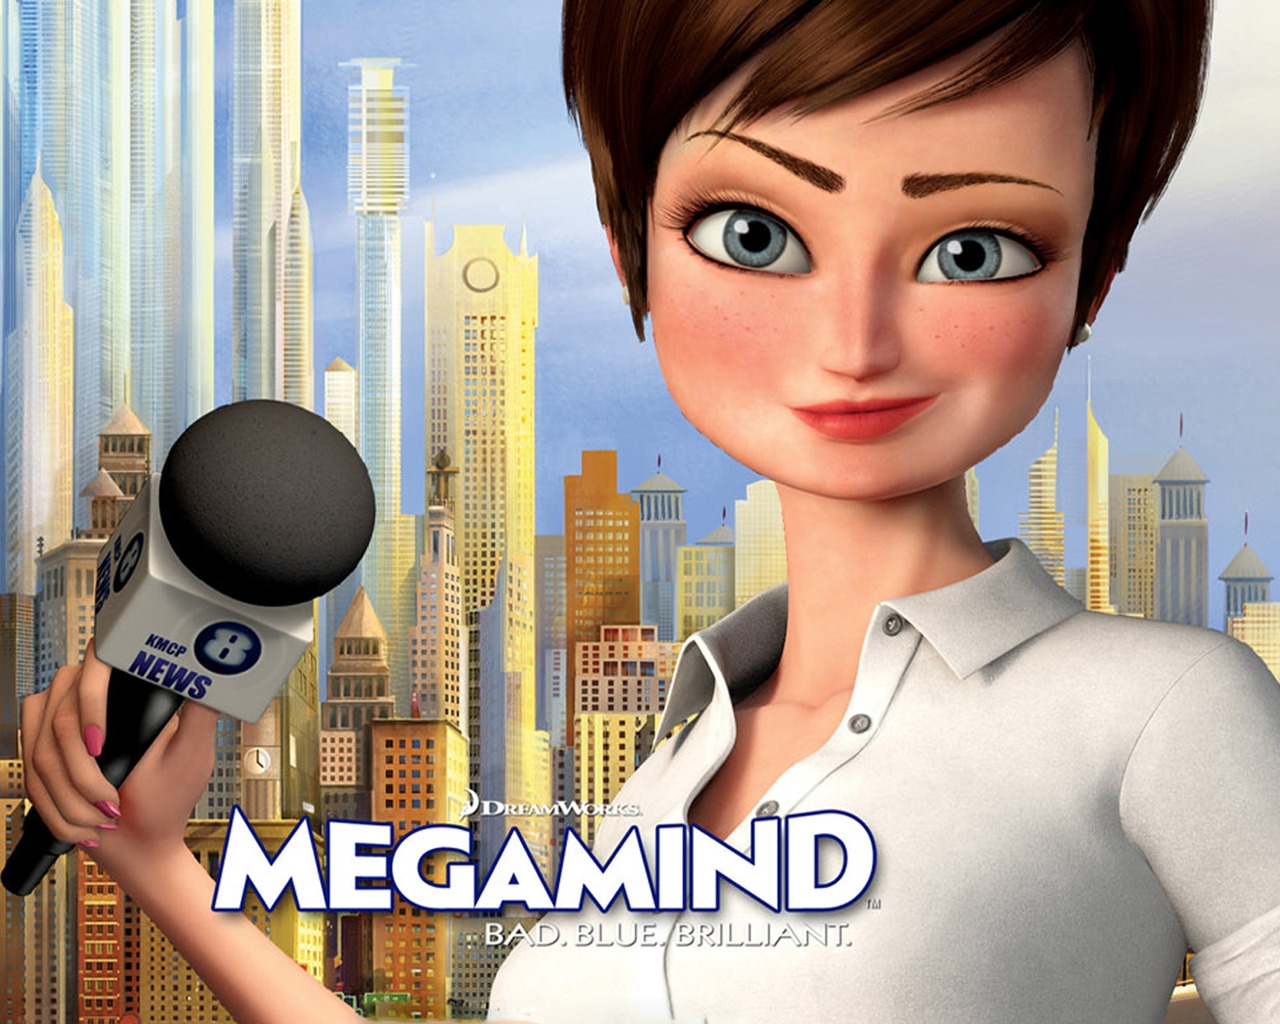 Megamind Roxanne Ritchie for 1280 x 1024 resolution